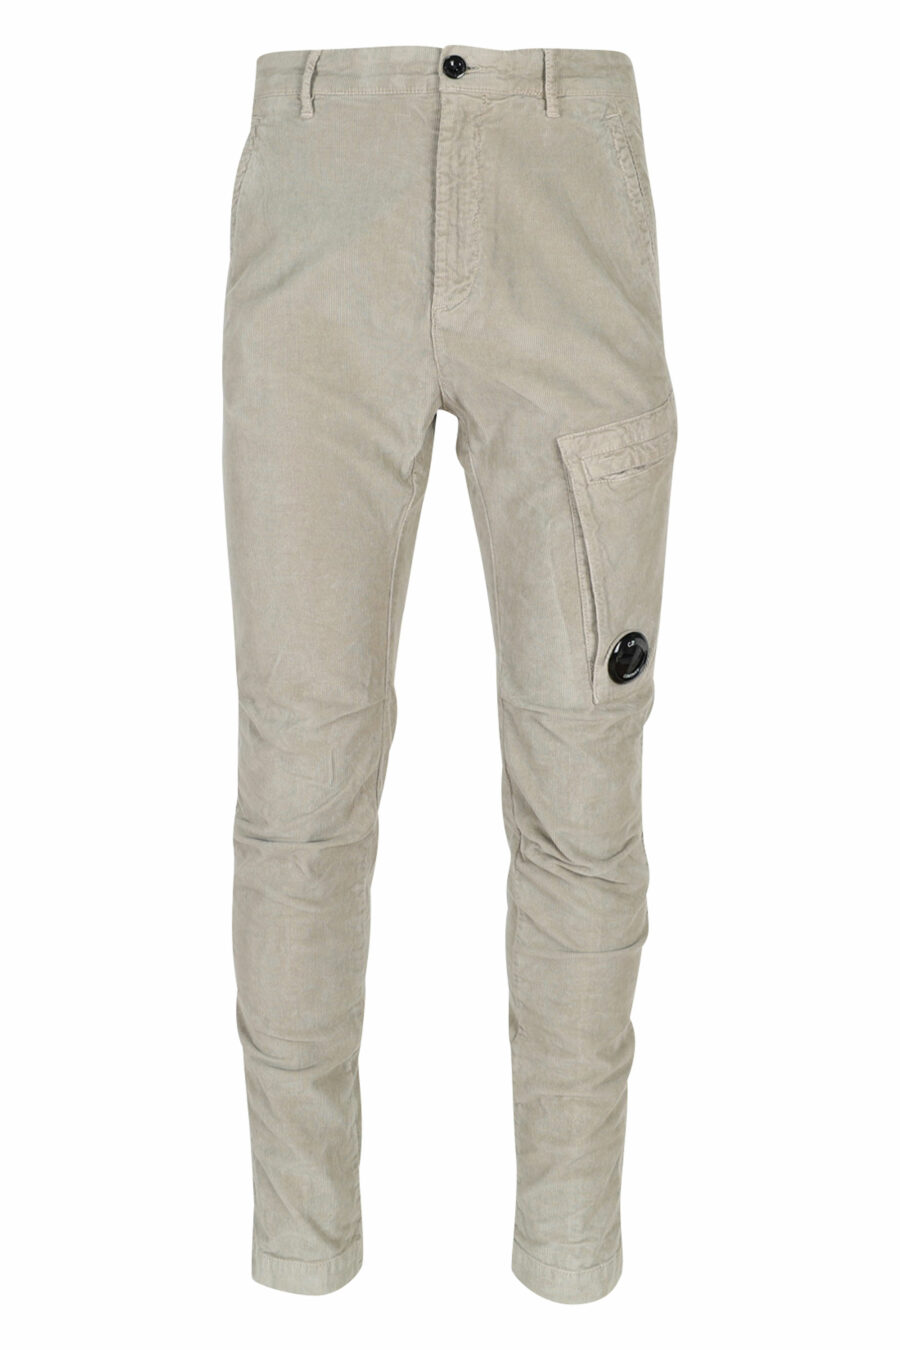 C.P. Company - Beige corduroy trousers with side pocket and lens